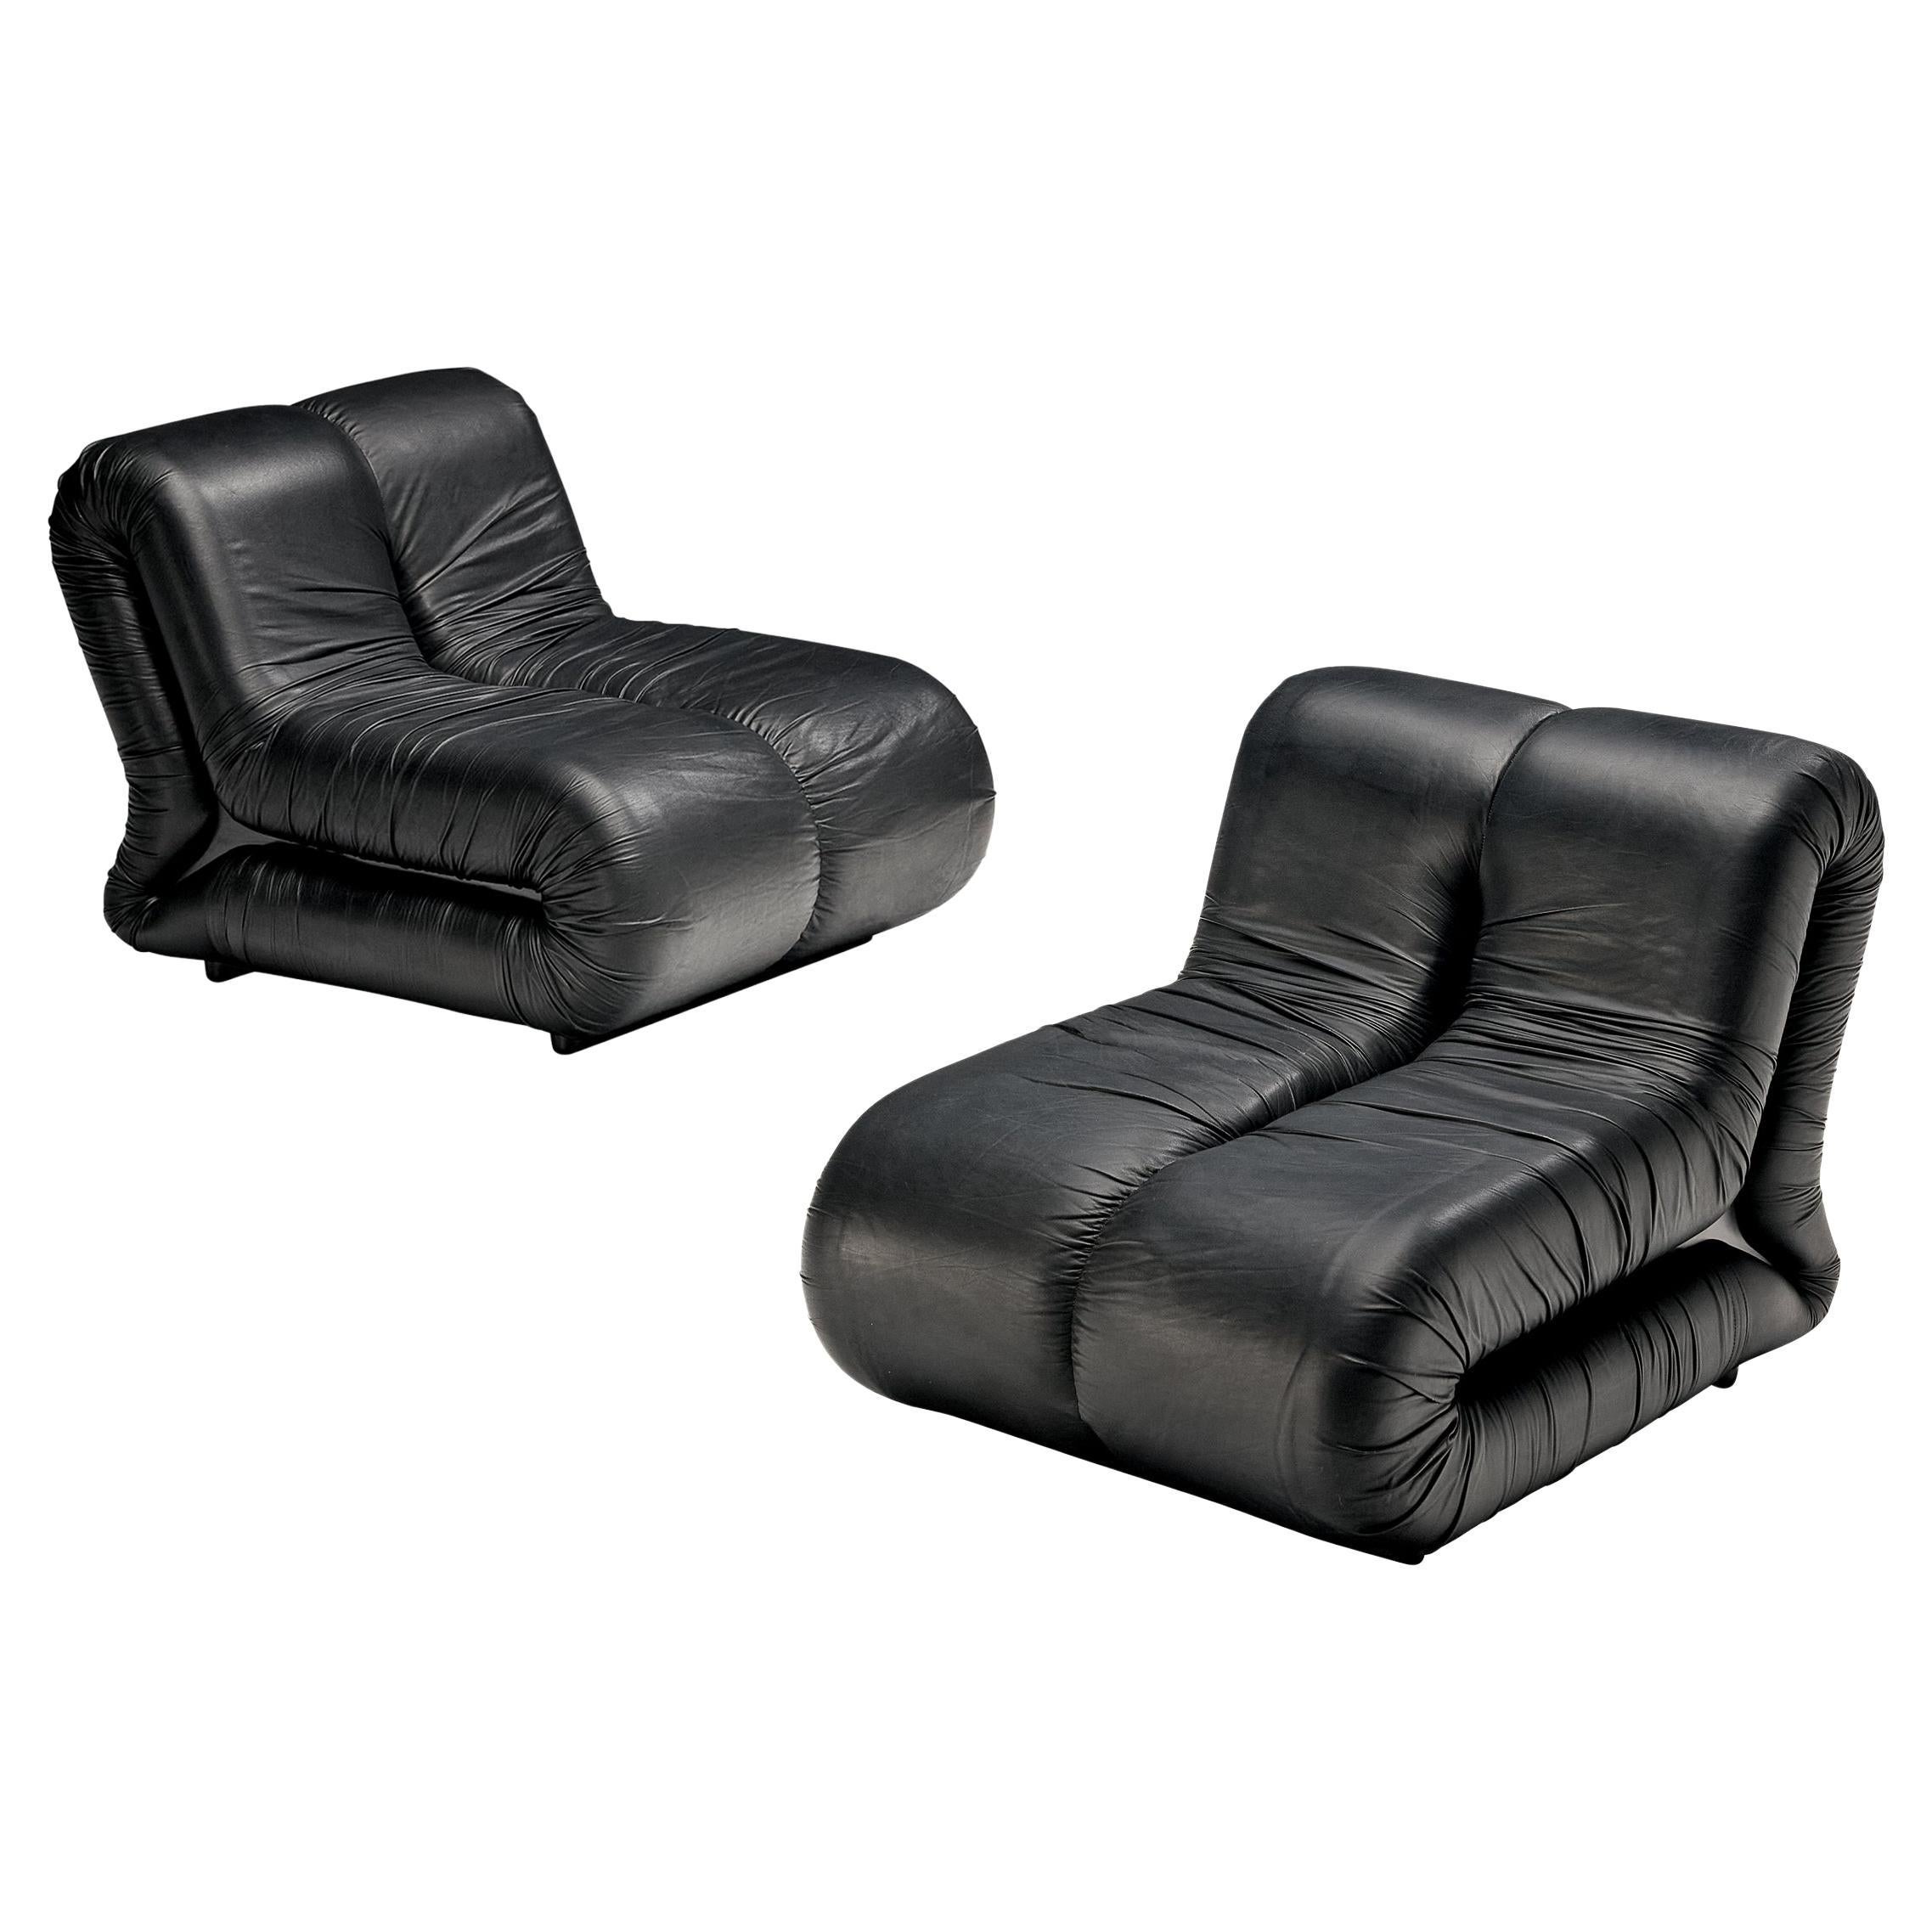 Claudio Vagnoni for 1P Pair of 'Pagru' Lounge Chairs in Black Leather